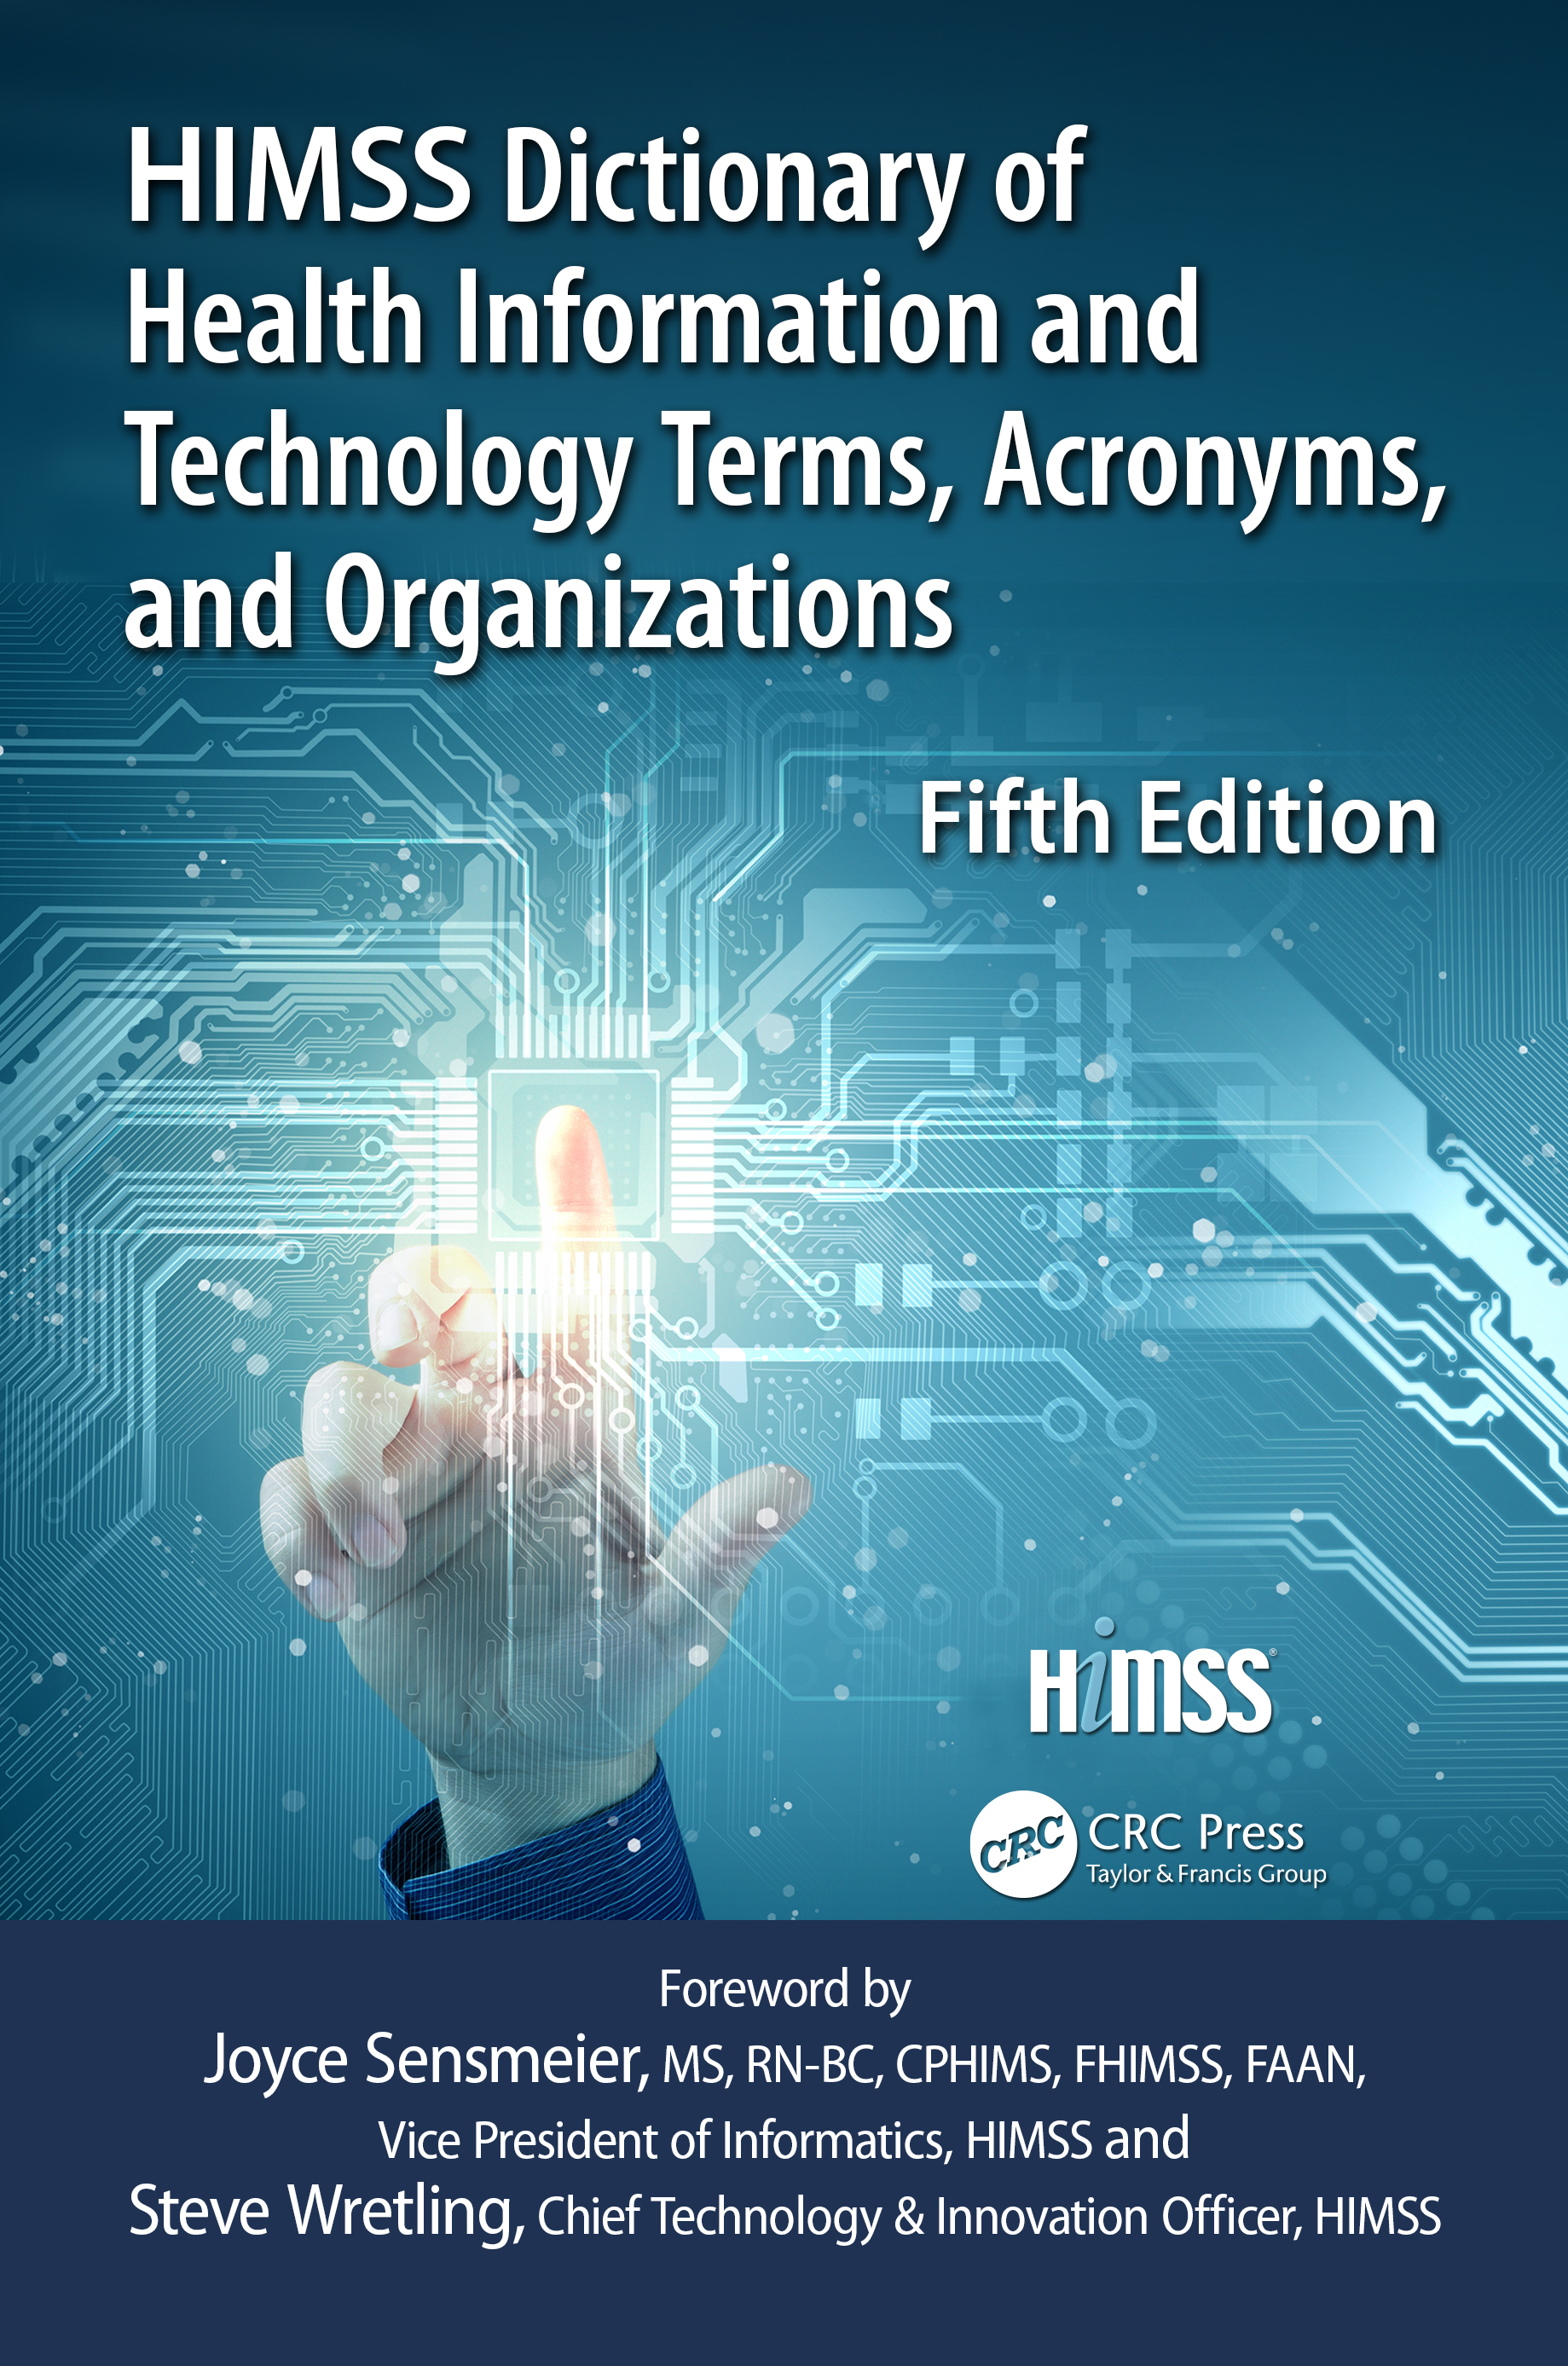 HIMSS Dictionary of Health Information Technology Terms, Acronyms and Organizations